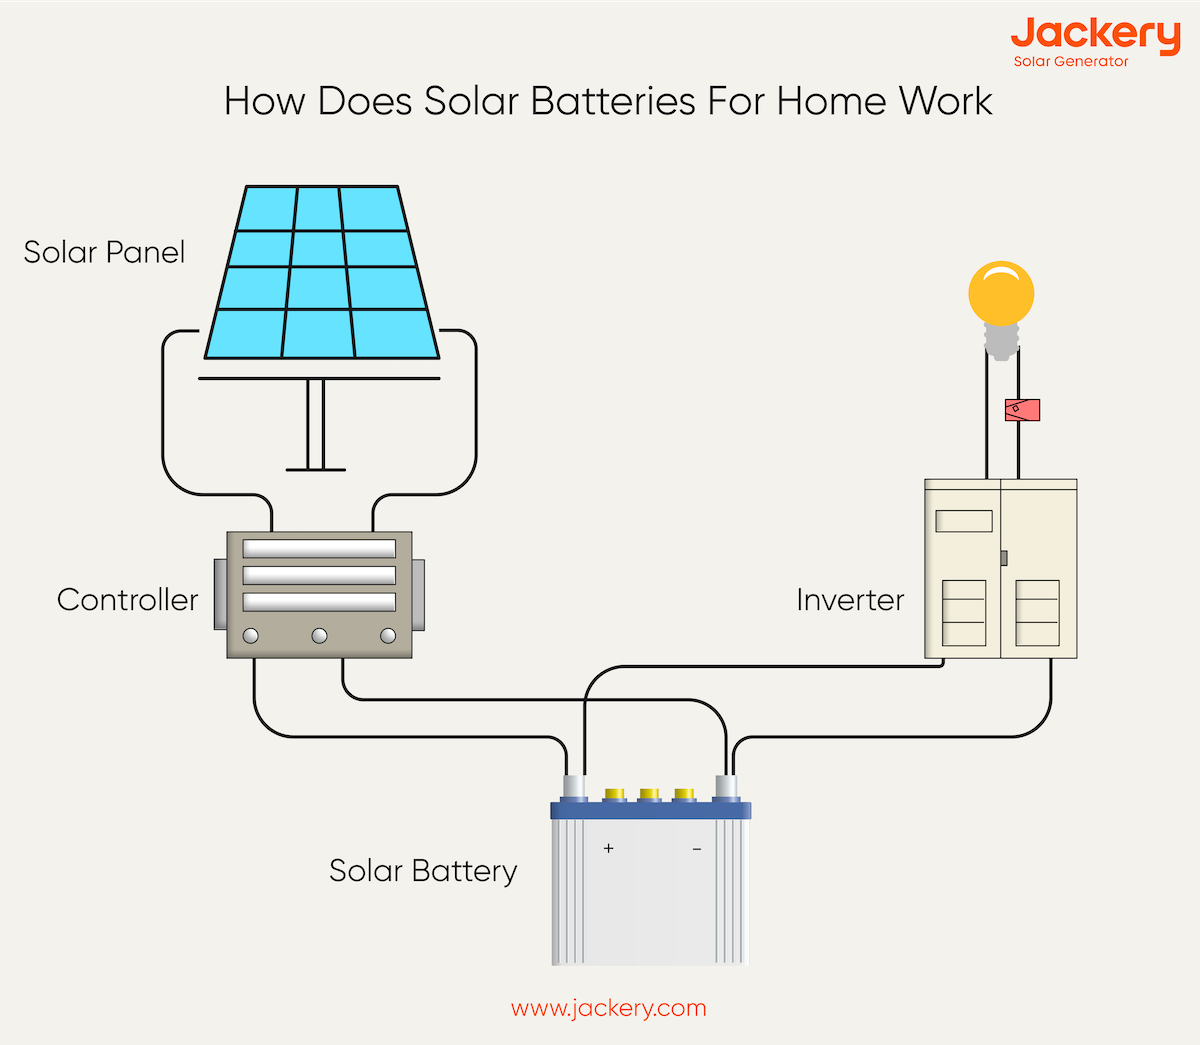 how does solar batteries for home work